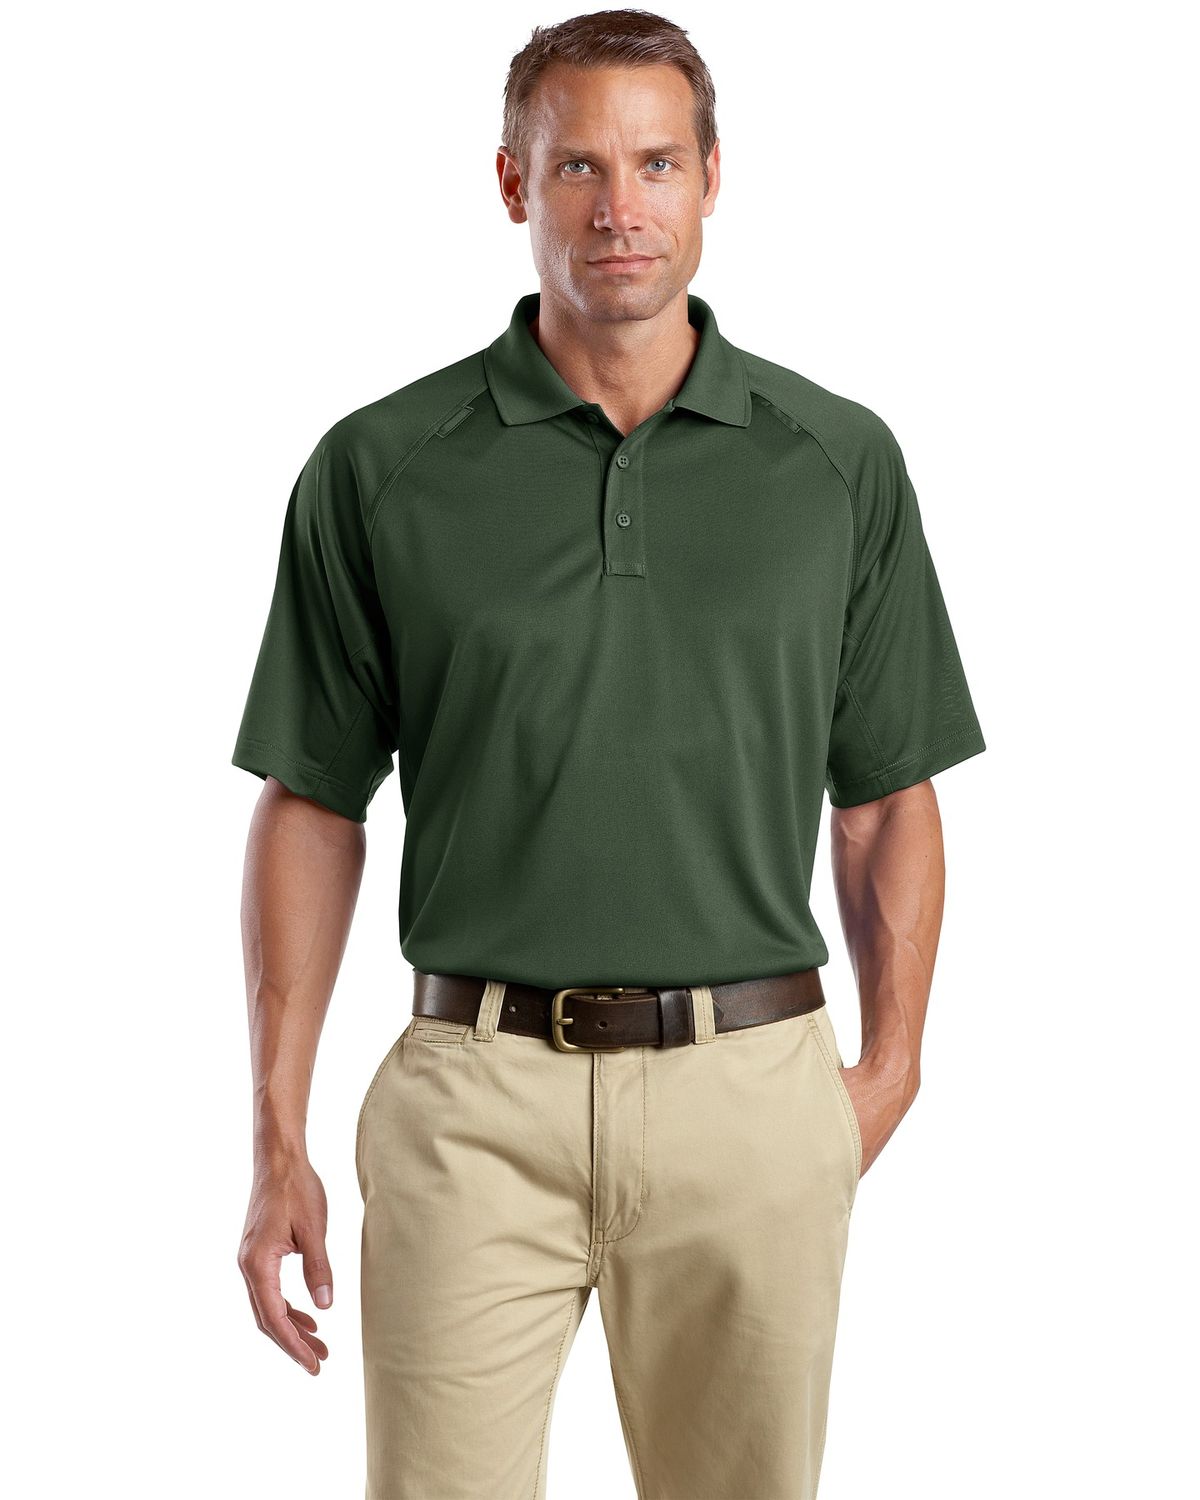 Discounted Offer Corner-Stone CS410 Snag-Proof Tactical Polo